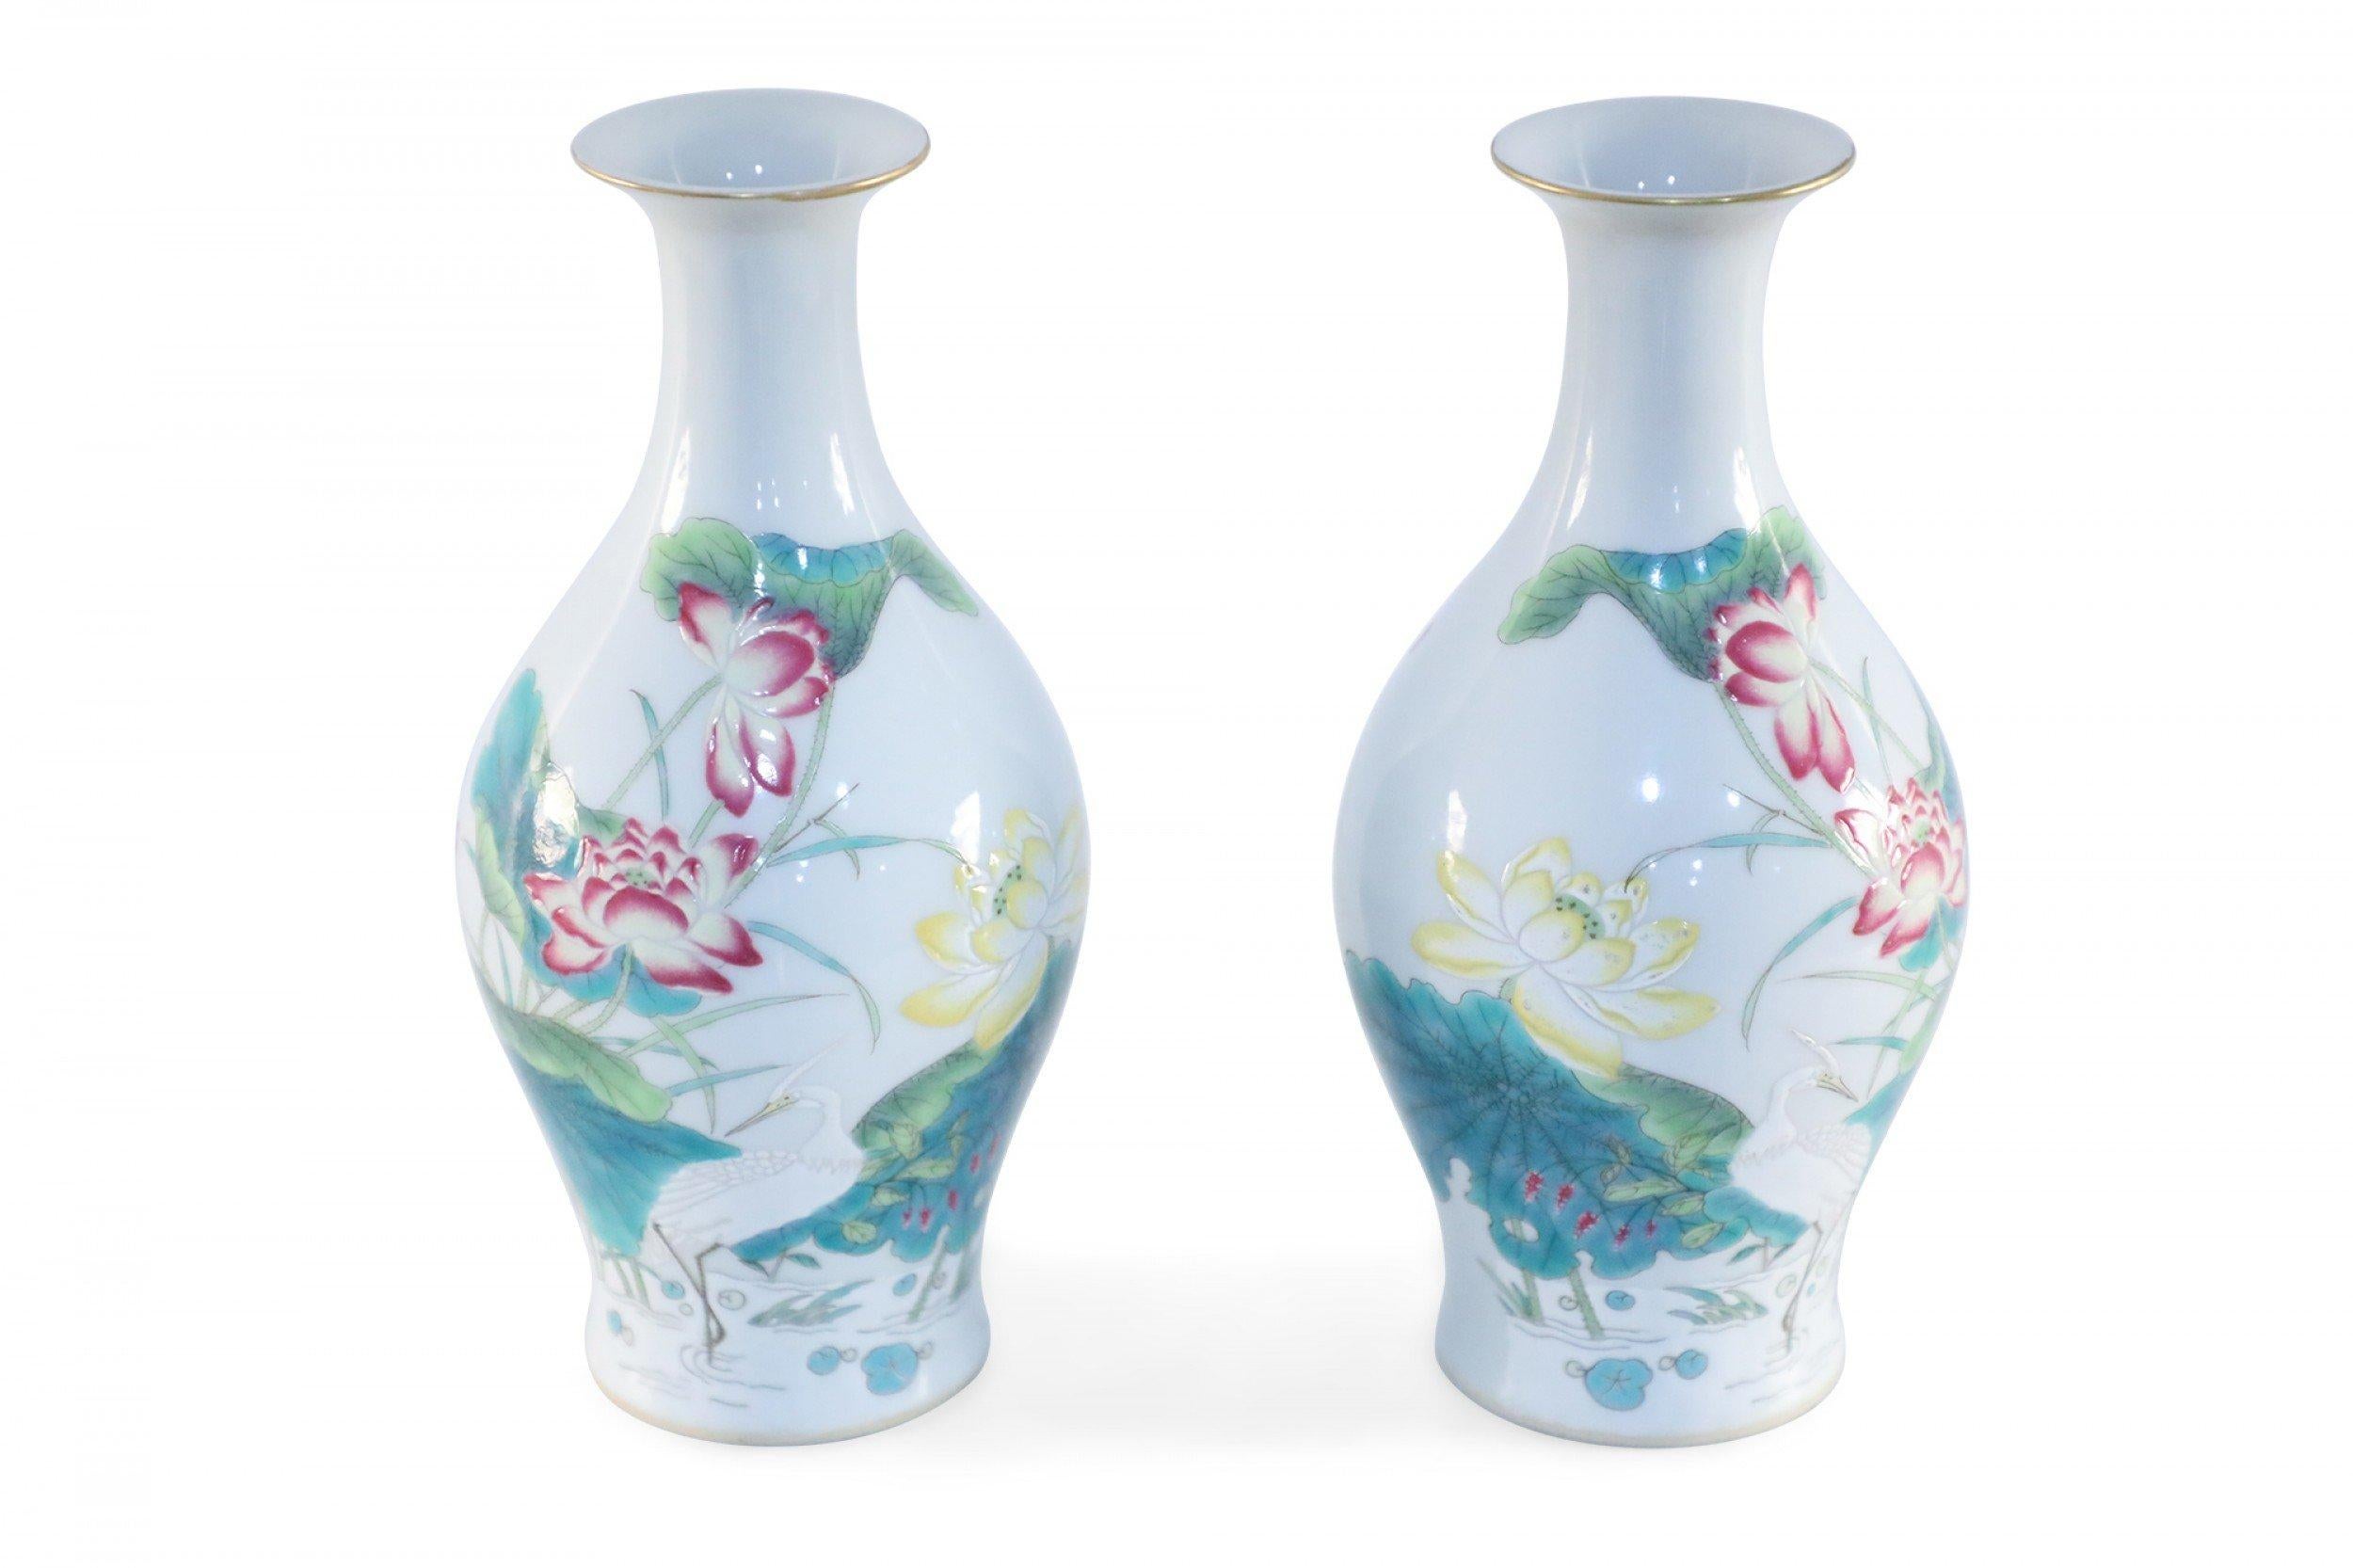 Pair of similar antique Chinese (19th century) famille rose porcelain vases with pear-shaped forms decorated with pink and yellow florals, lily pads, cranes, and gold rims on one side and characters on the reverse (vases differ slightly in pattern)